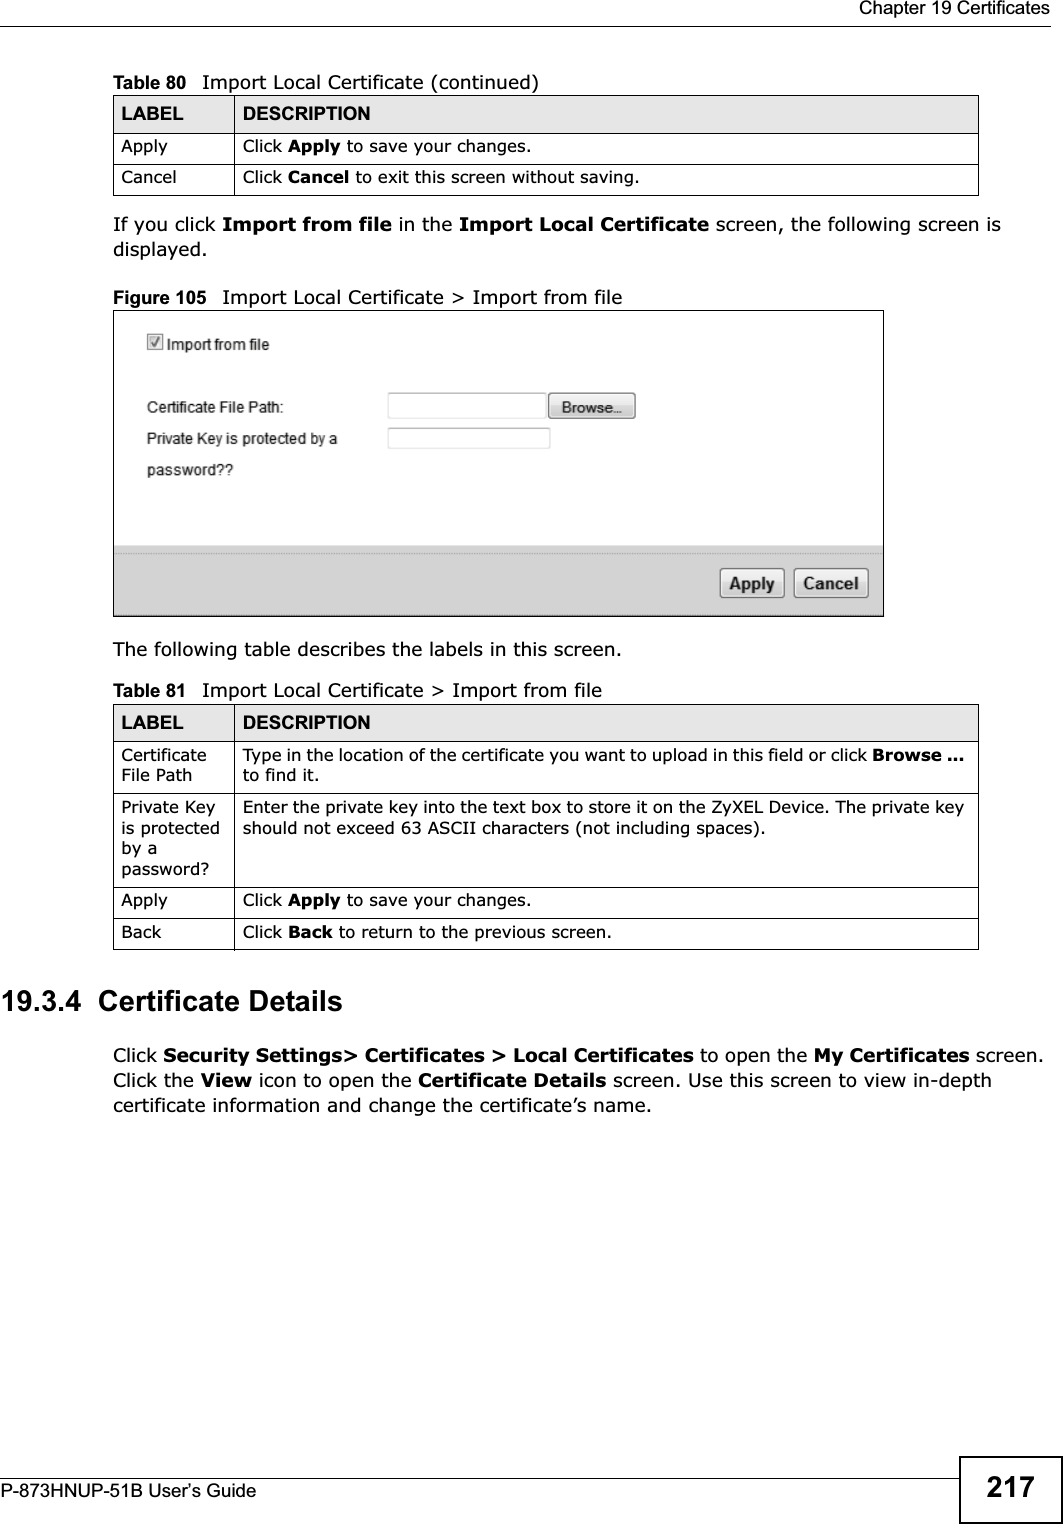  Chapter 19 CertificatesP-873HNUP-51B User’s Guide 217If you click Import from file in the Import Local Certificate screen, the following screen is displayed.Figure 105   Import Local Certificate &gt; Import from fileThe following table describes the labels in this screen. 19.3.4  Certificate Details Click Security Settings&gt; Certificates &gt; Local Certificates to open the My Certificates screen. Click the View icon to open the Certificate Details screen. Use this screen to view in-depth certificate information and change the certificate’s name. Apply Click Apply to save your changes.Cancel Click Cancel to exit this screen without saving.Table 81   Import Local Certificate &gt; Import from fileLABEL DESCRIPTIONCertificate File PathType in the location of the certificate you want to upload in this field or click Browse ...to find it. Private Key is protected by a password?Enter the private key into the text box to store it on the ZyXEL Device. The private key should not exceed 63 ASCII characters (not including spaces). Apply Click Apply to save your changes.Back Click Back to return to the previous screen.Table 80   Import Local Certificate (continued)LABEL DESCRIPTION